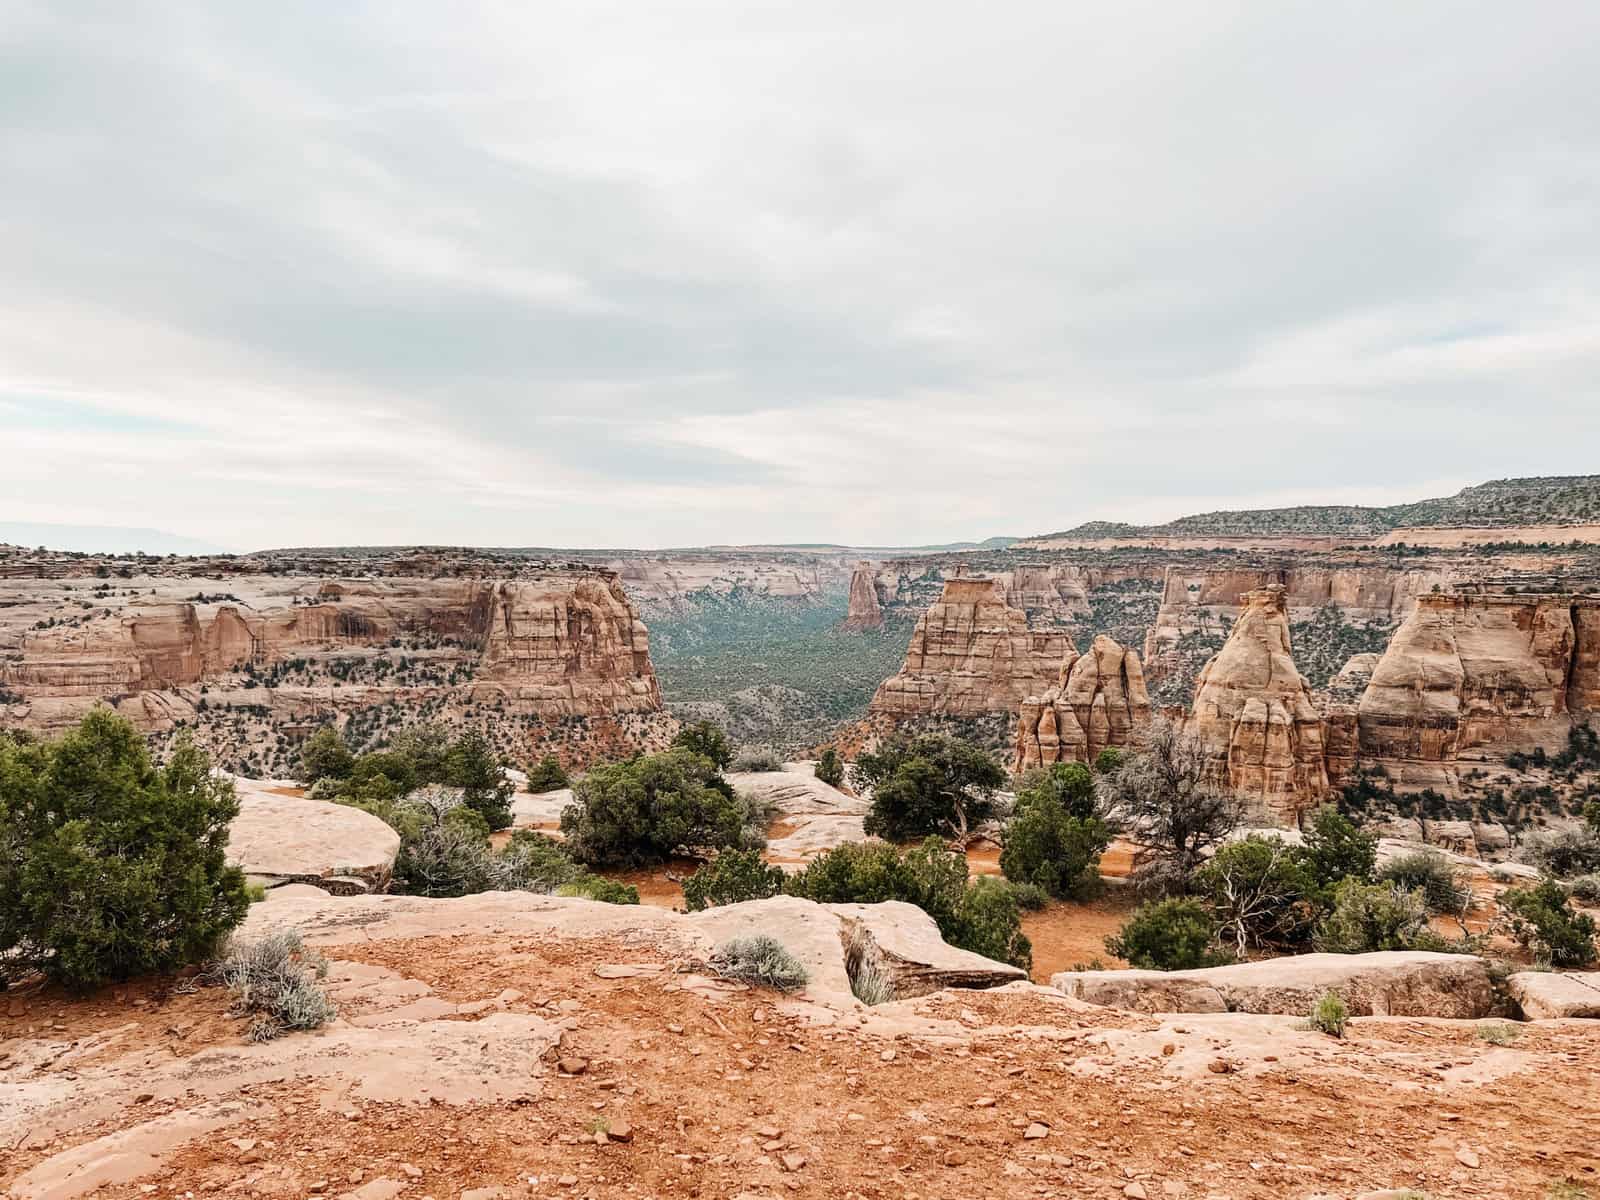 A landscape view of the Colorado National Monument.